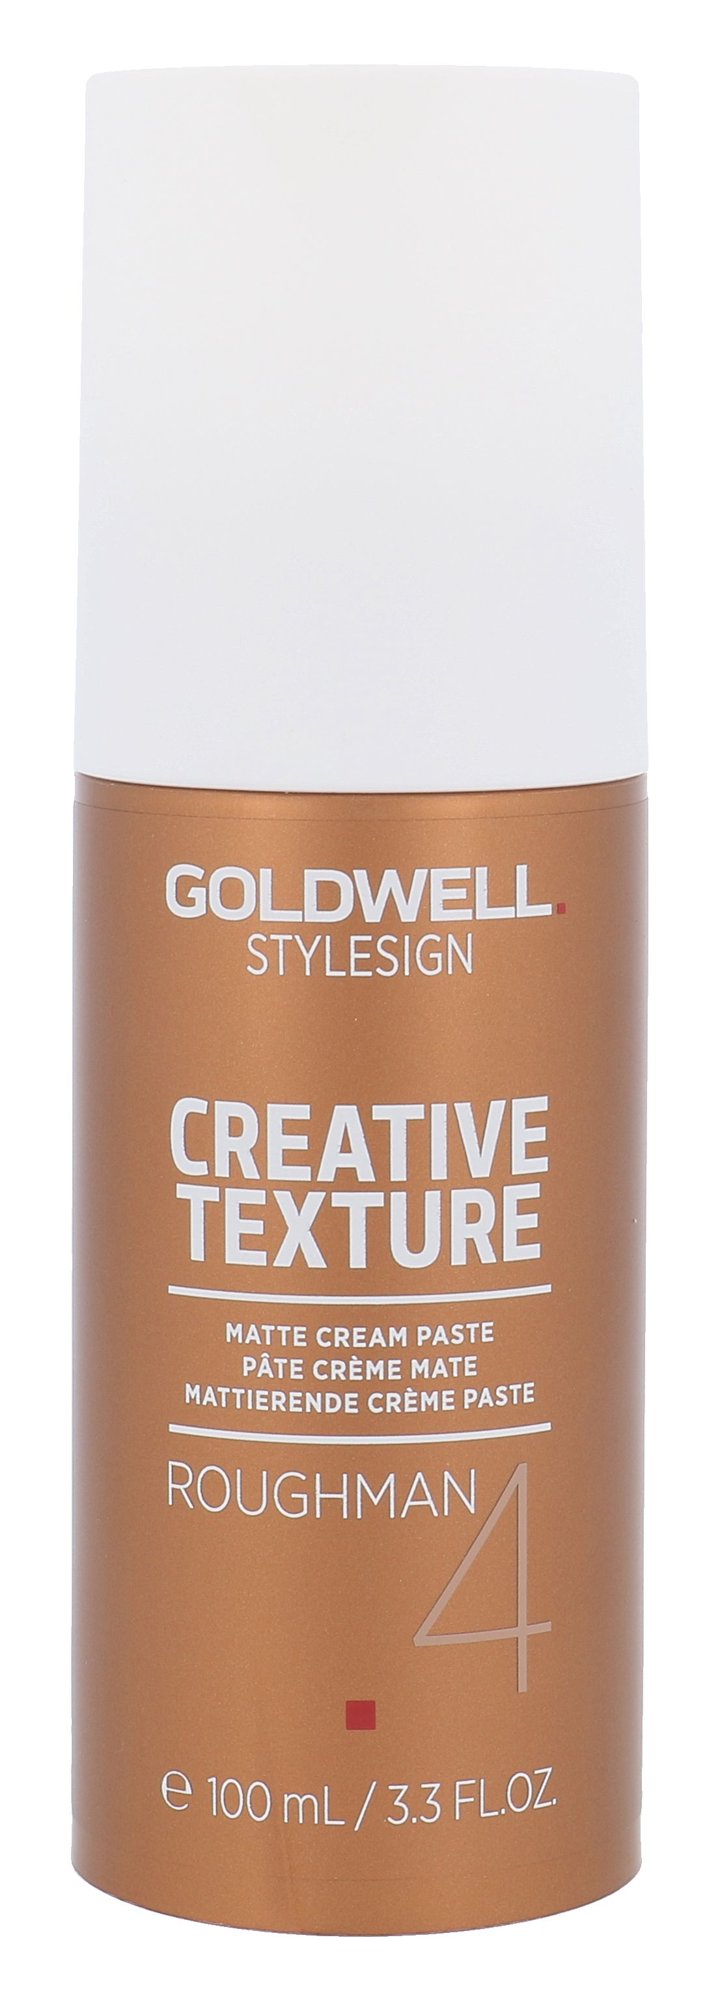 Goldwell Style Sign Creative Texture Roughman